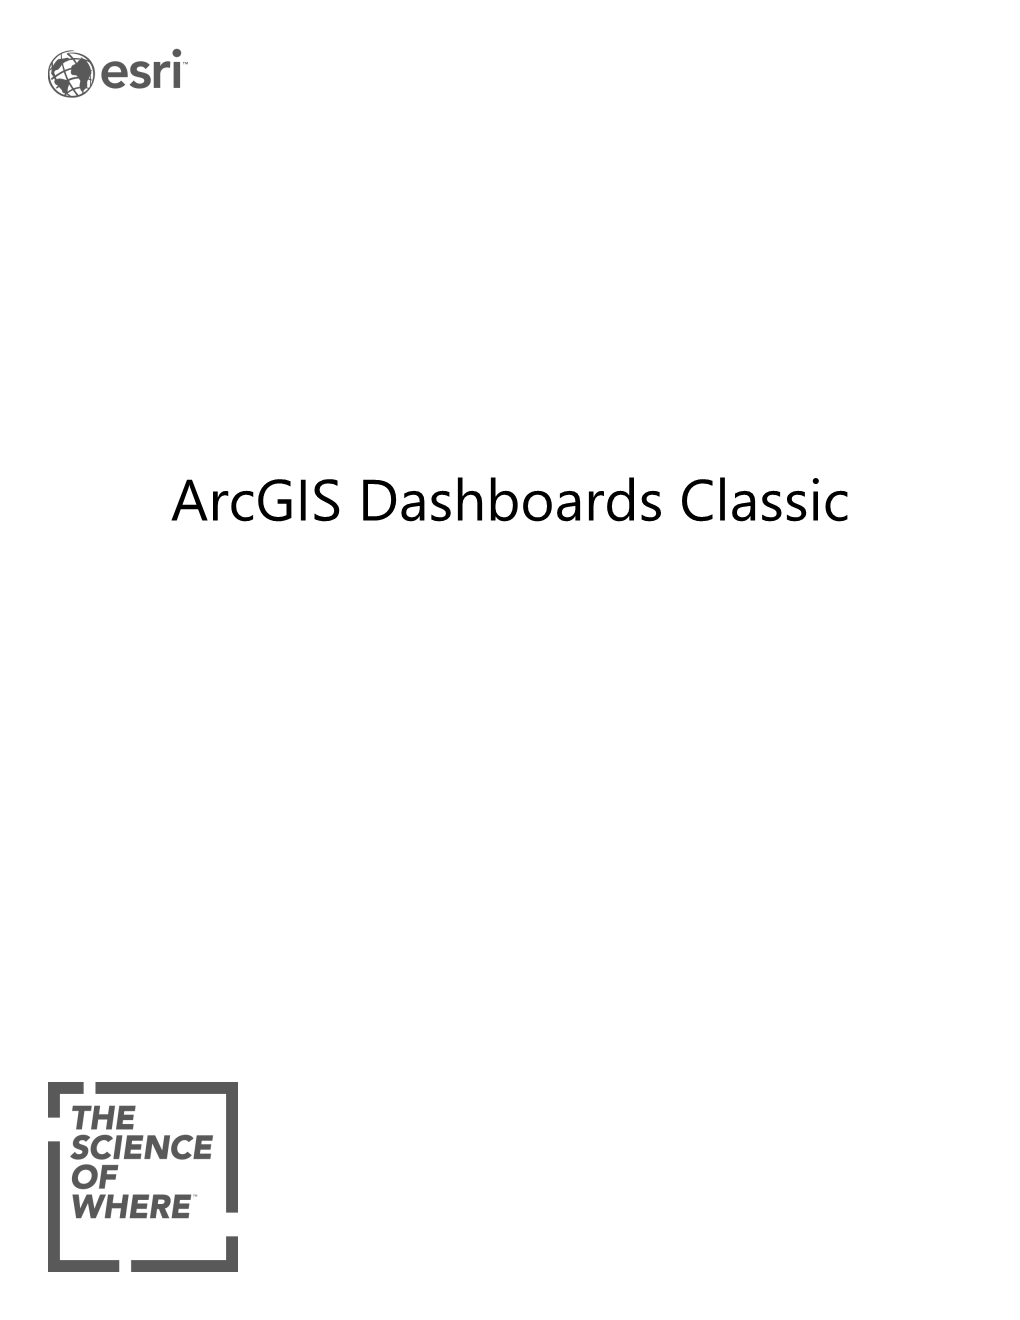 Arcgis Dashboards Classic